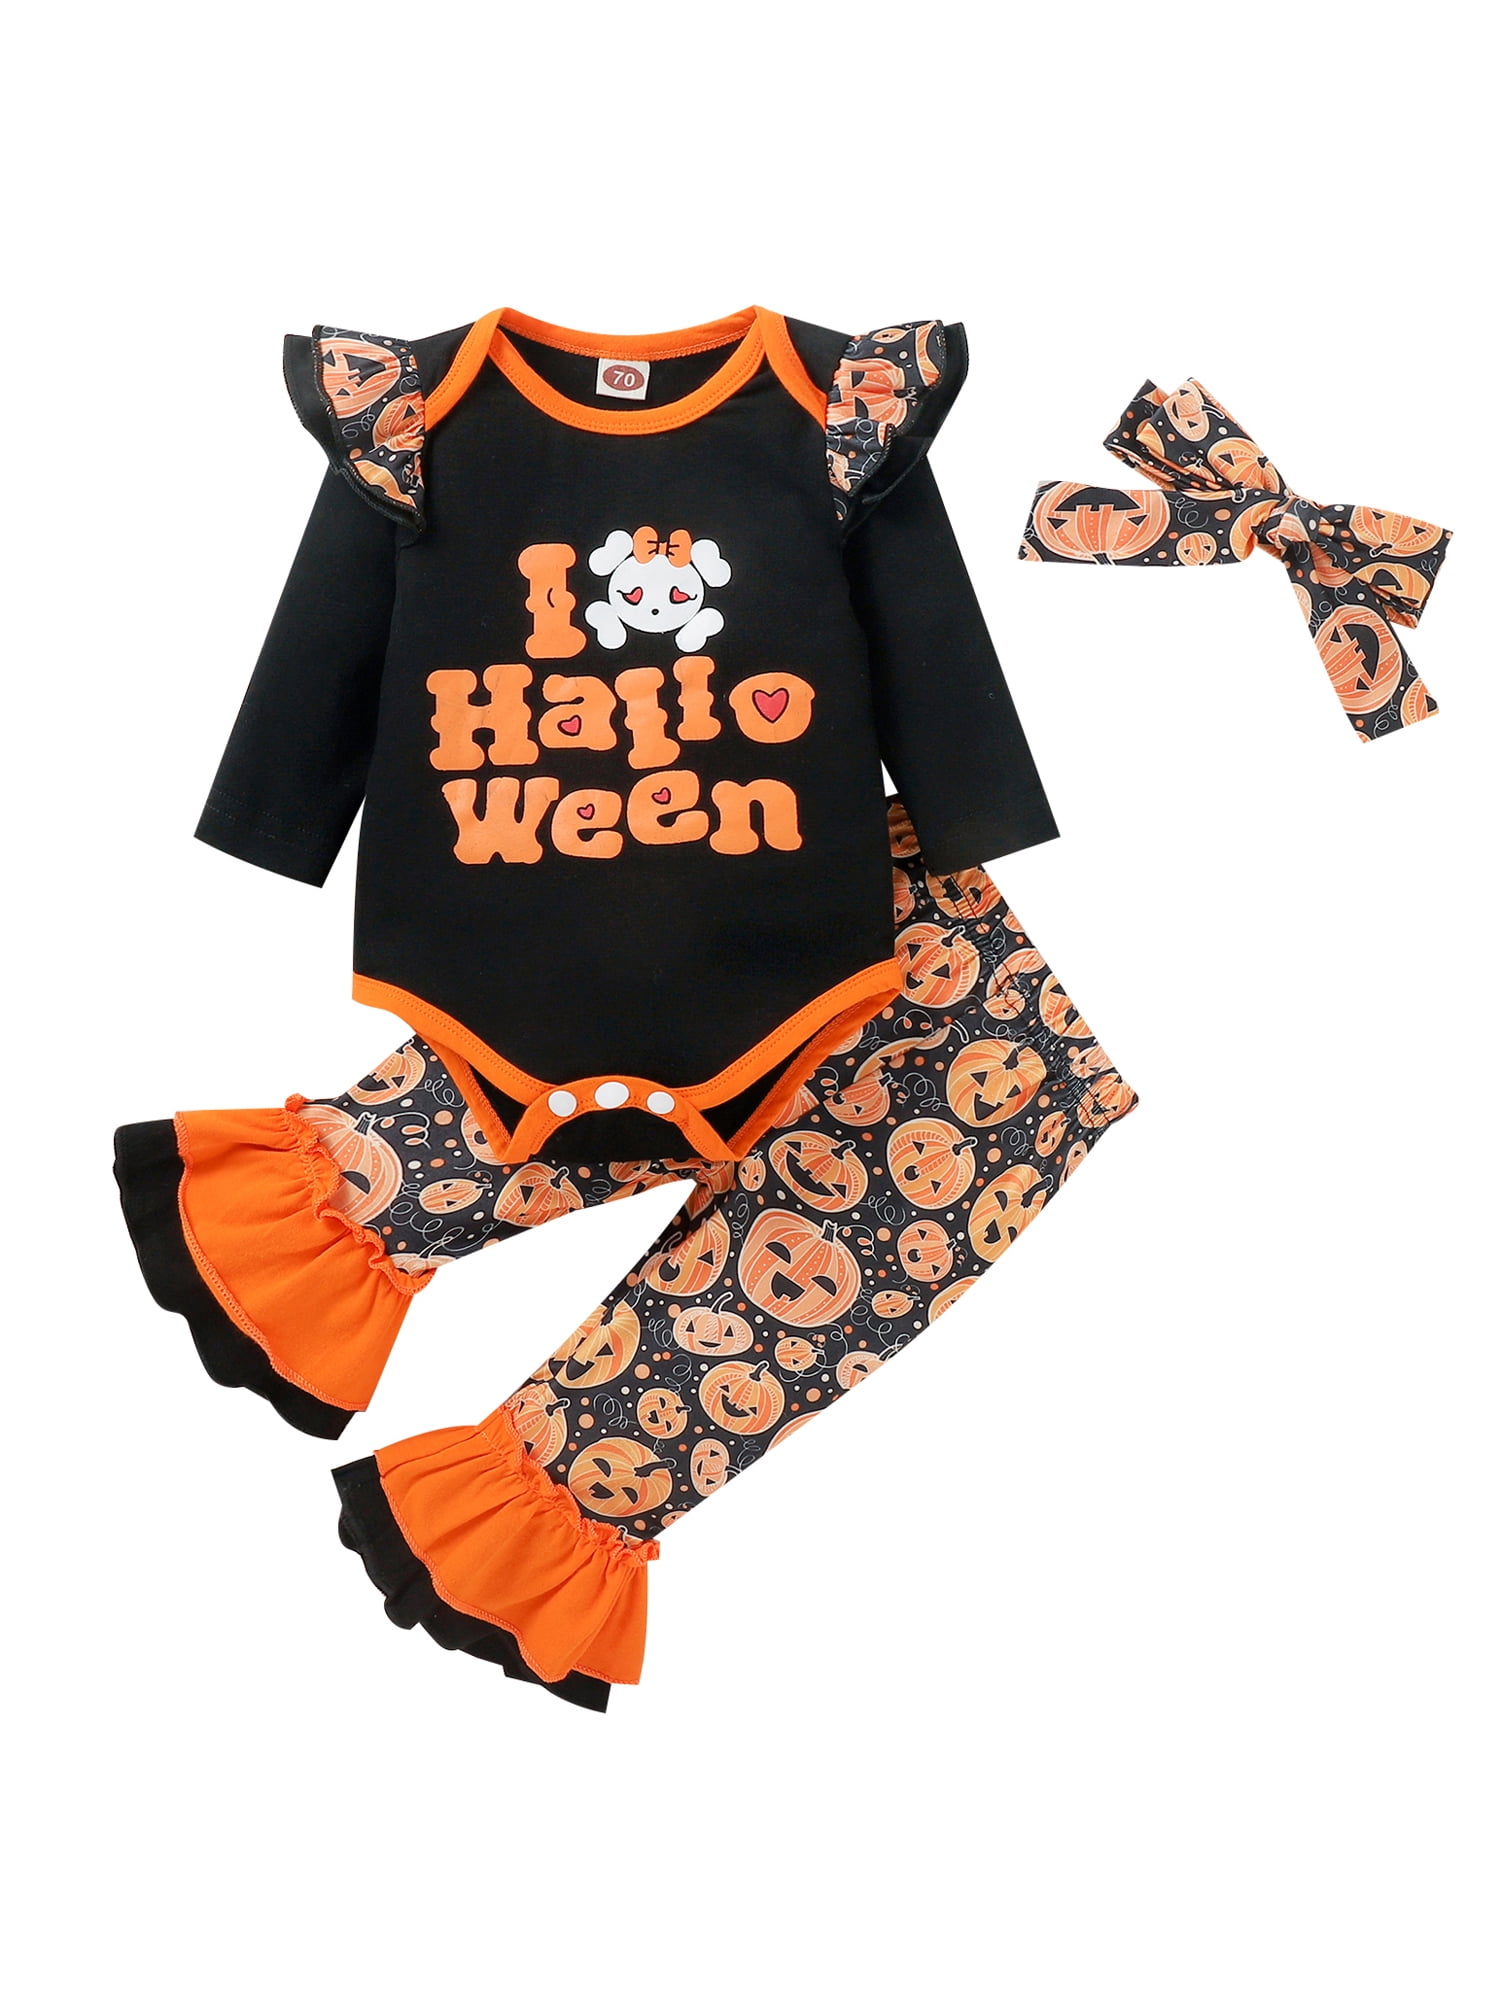 Details about   Newborn Infant Baby Girl Jumpsuit Tops Pants Headband Outfits Romper Clothes Set 